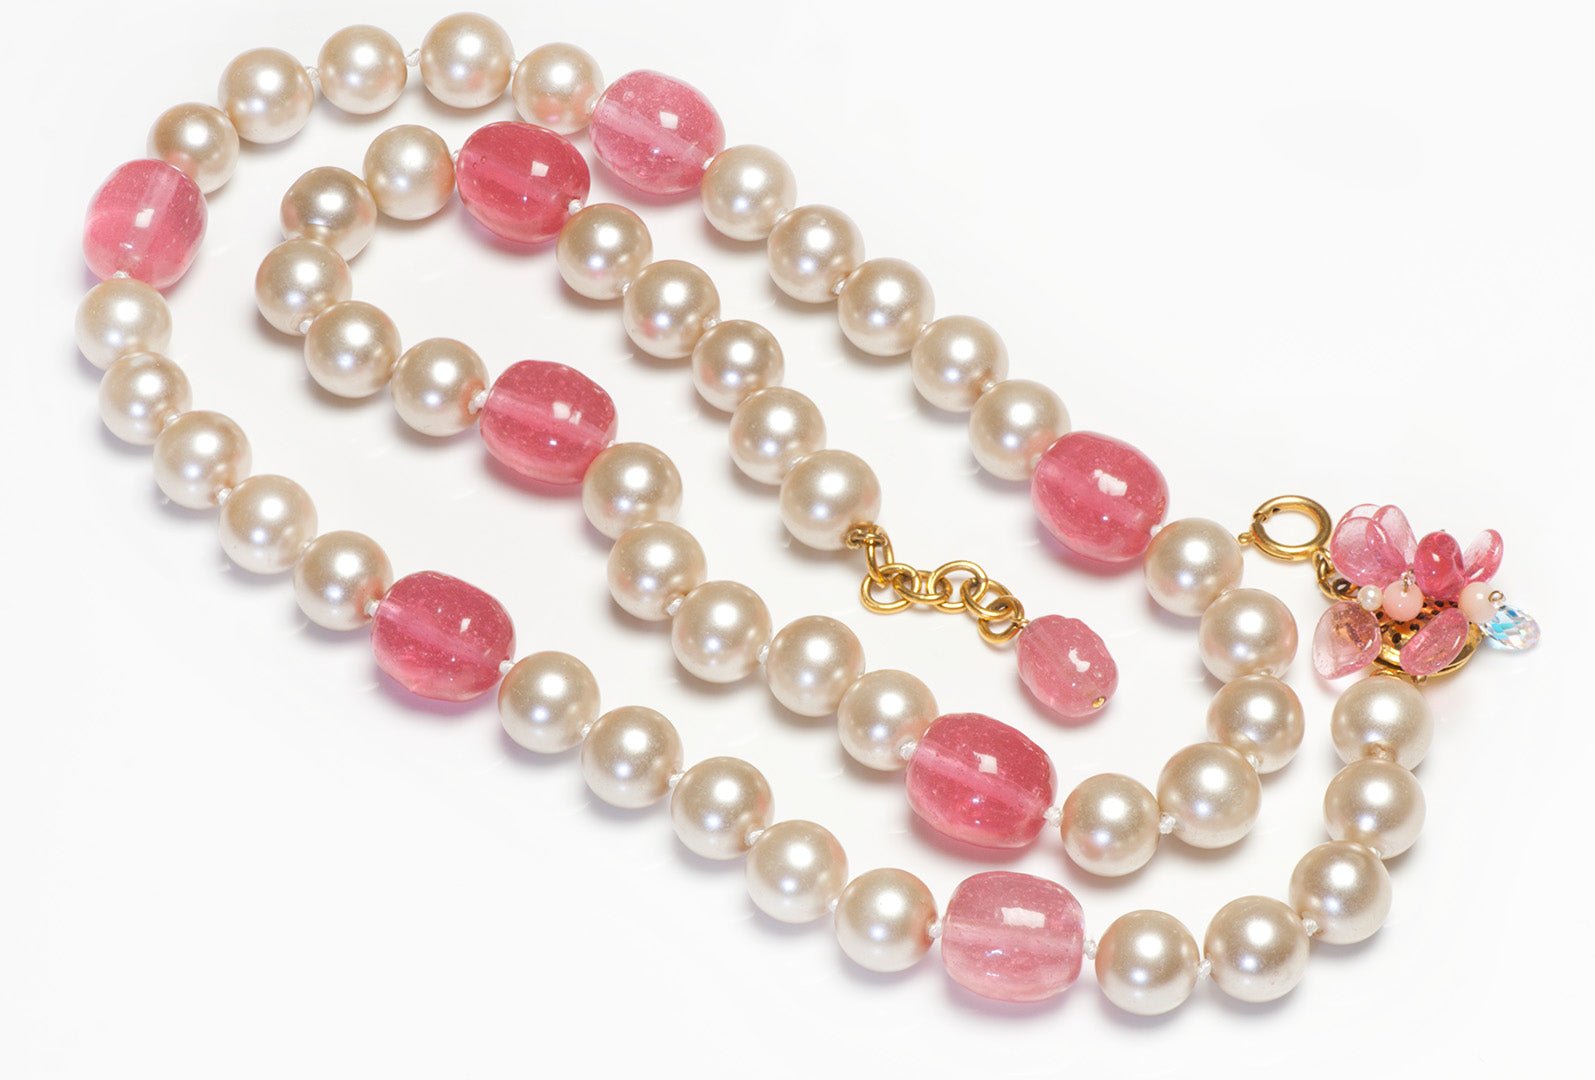 Chanel Spring 1997 Maison Gripoix Pink Glass Pearl Beads Sautoir Necklace